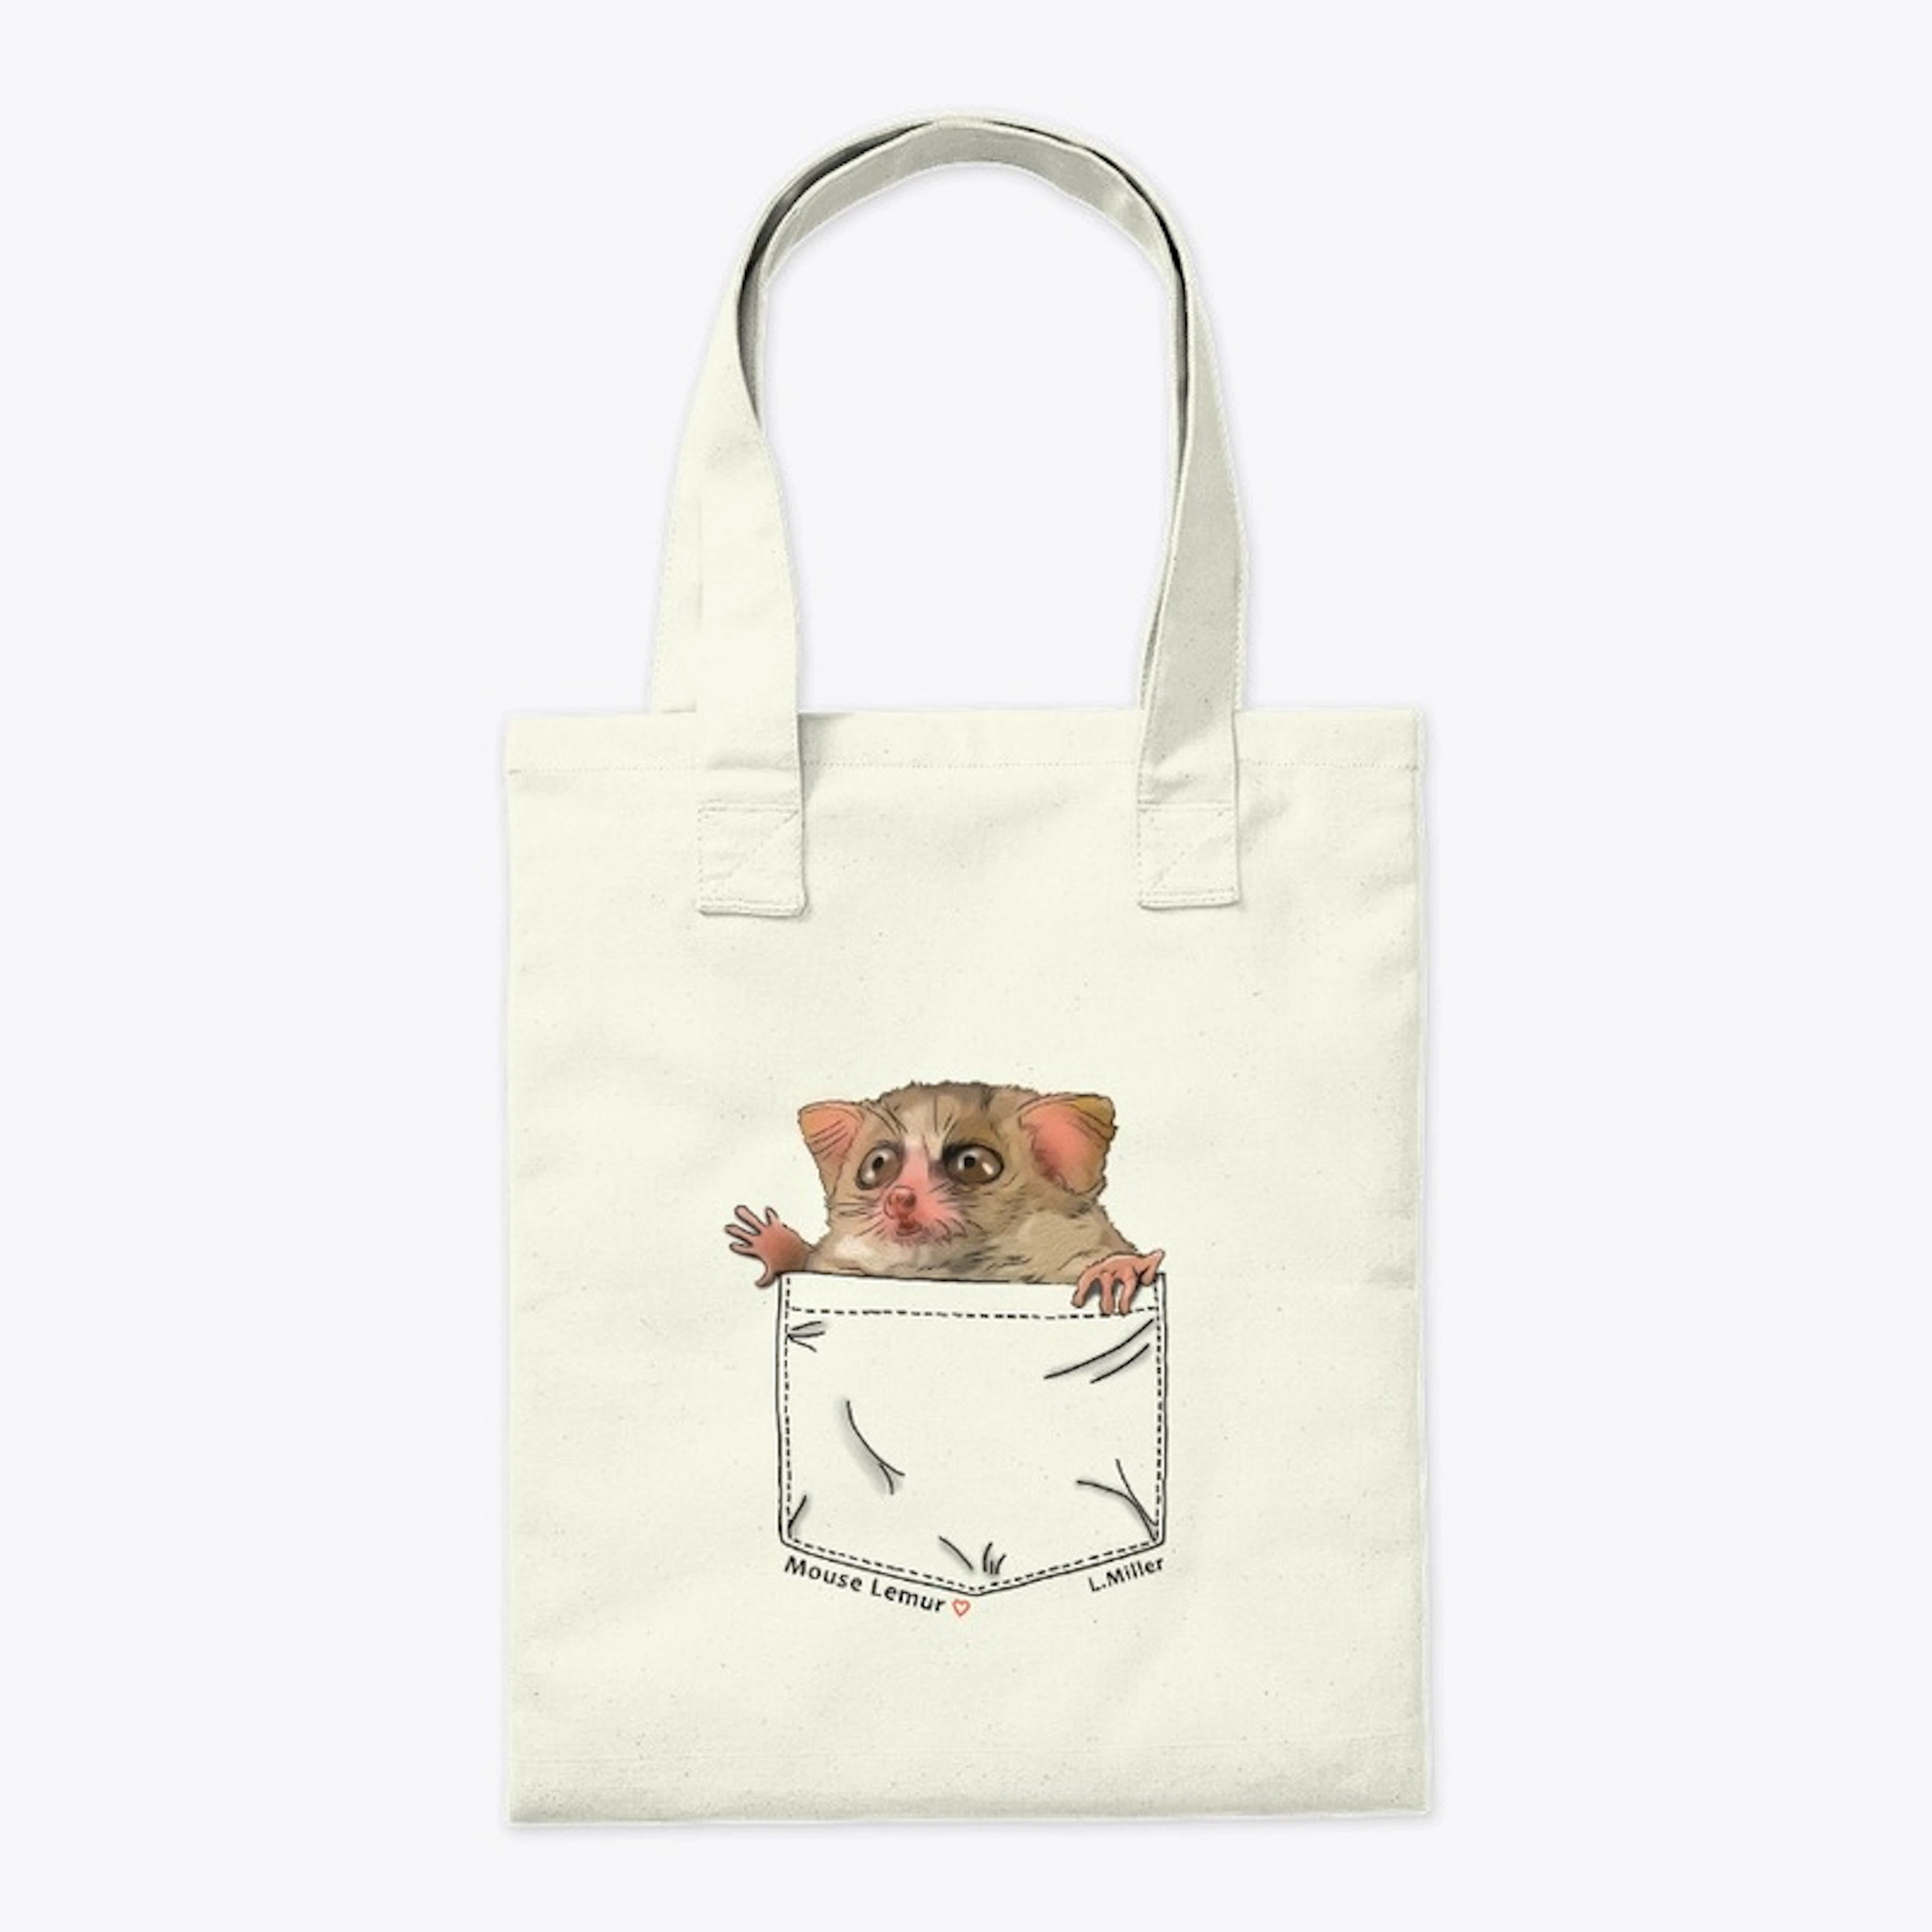 Mouse Lemur in Pocket by Louise Miller